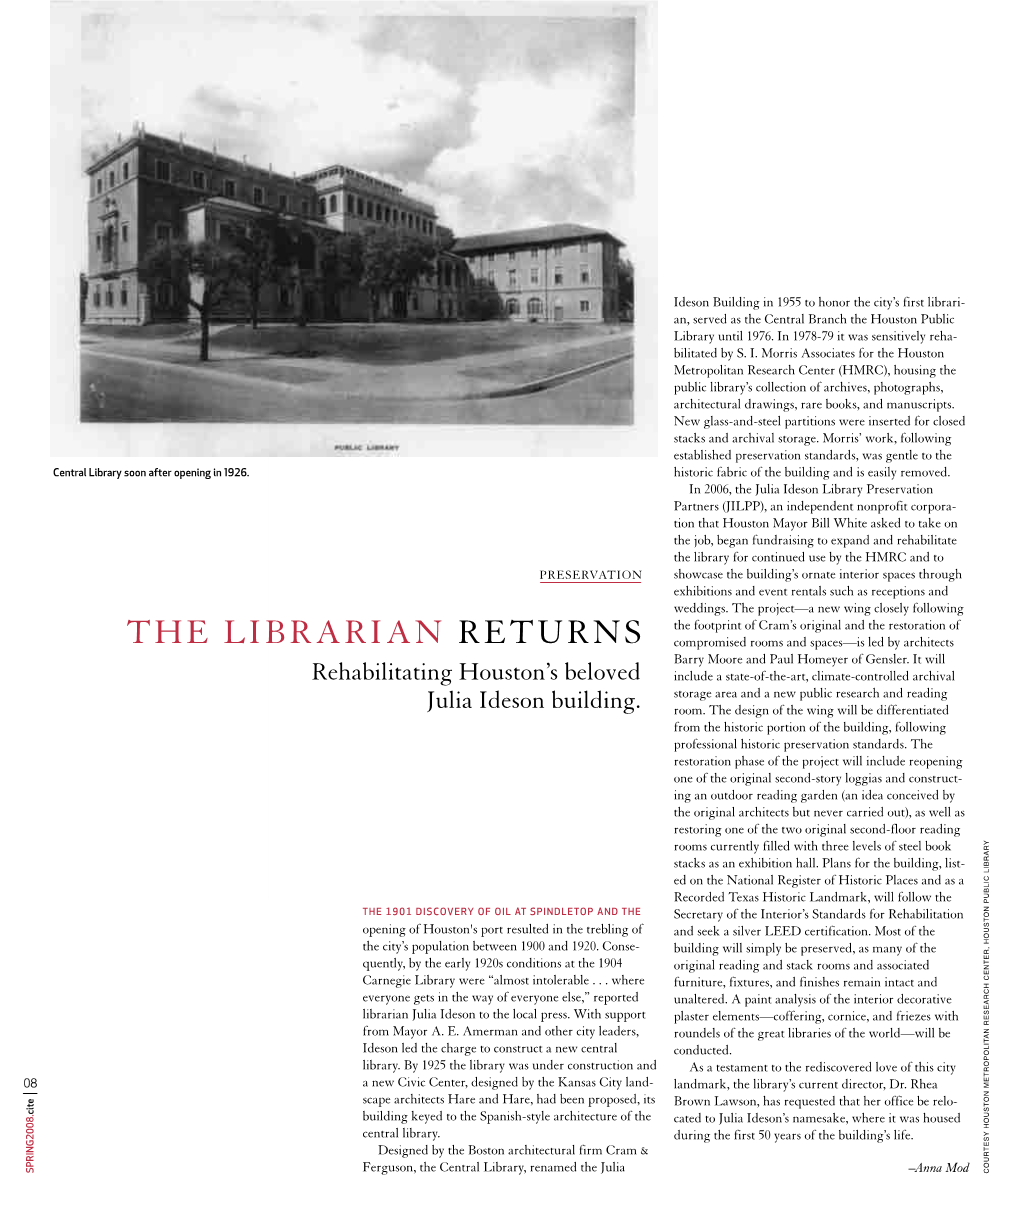 THE LIBRARIAN RETURNS Compromised Rooms and Spaces—Is Led by Architects Barry Moore and Paul Homeyer of Gensler